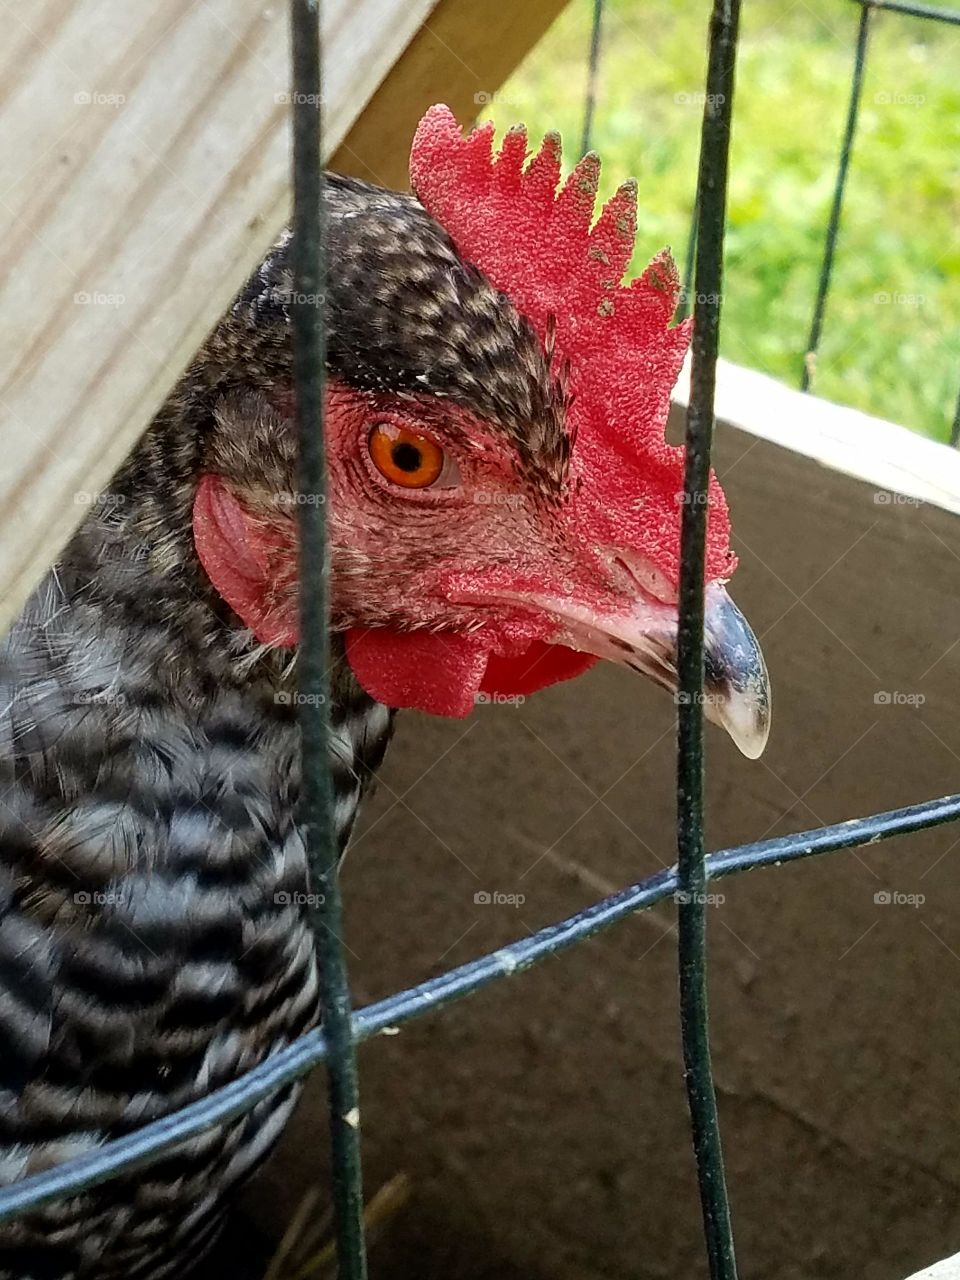 close-up of hen in its pen, looking through wires